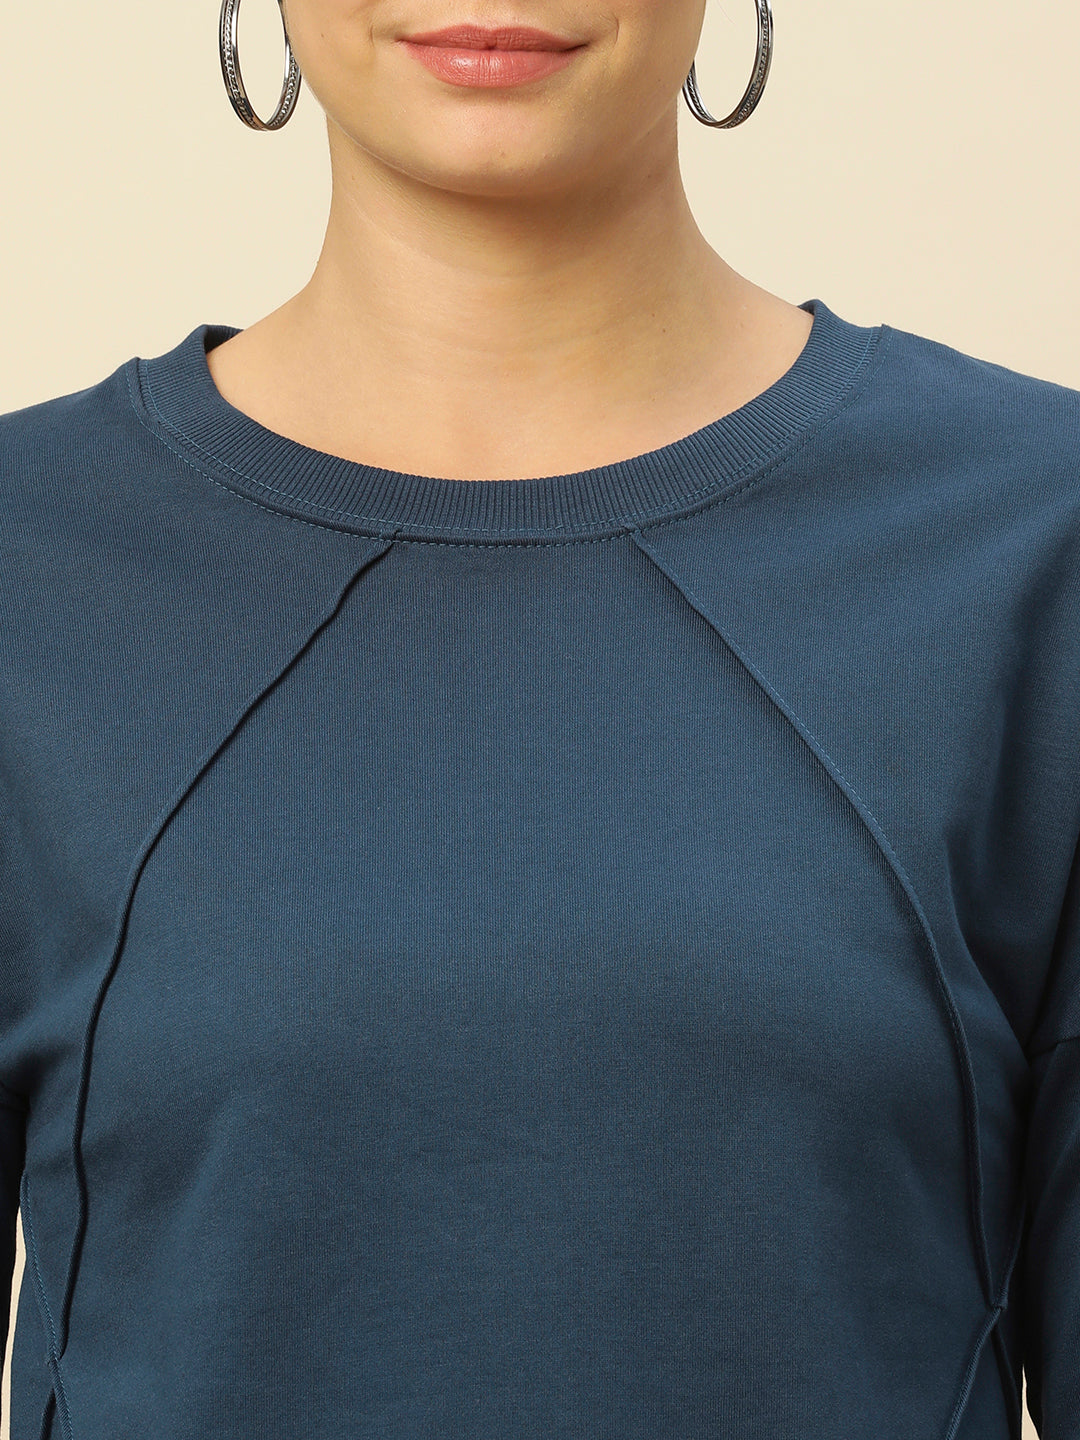 French Terry Drop Shoulder Sweatshirt With Pin Tucked Detailing